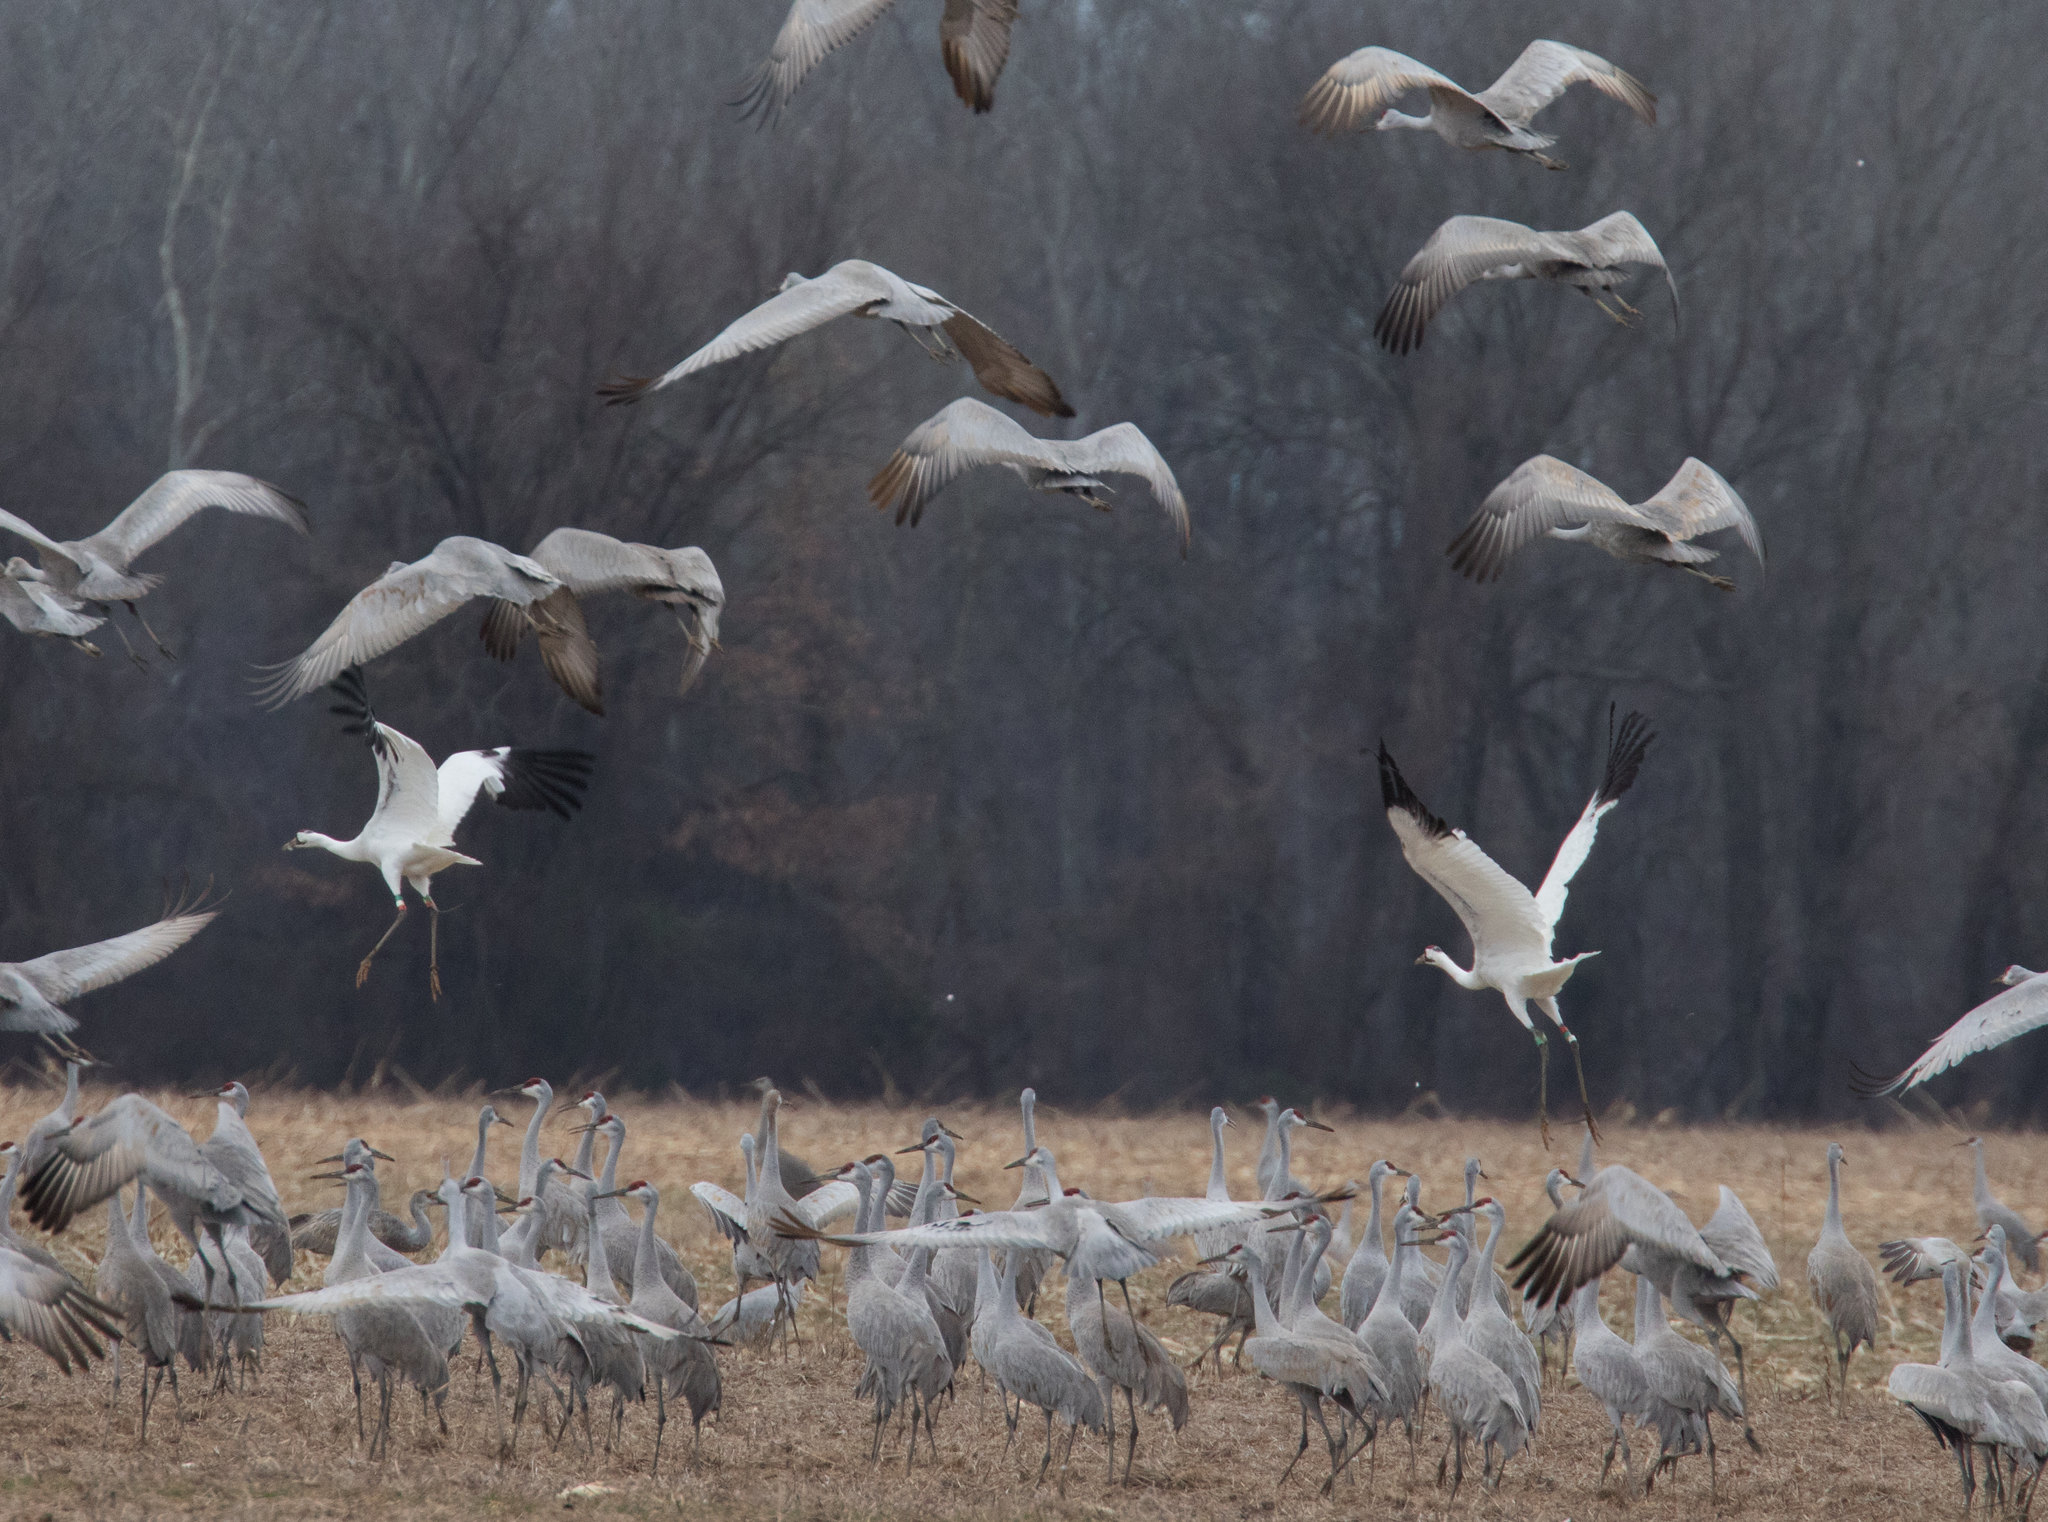 Sandhill and Whooping Cranes, some flying and more Sandhill Cranes standing in a field with woods in the background